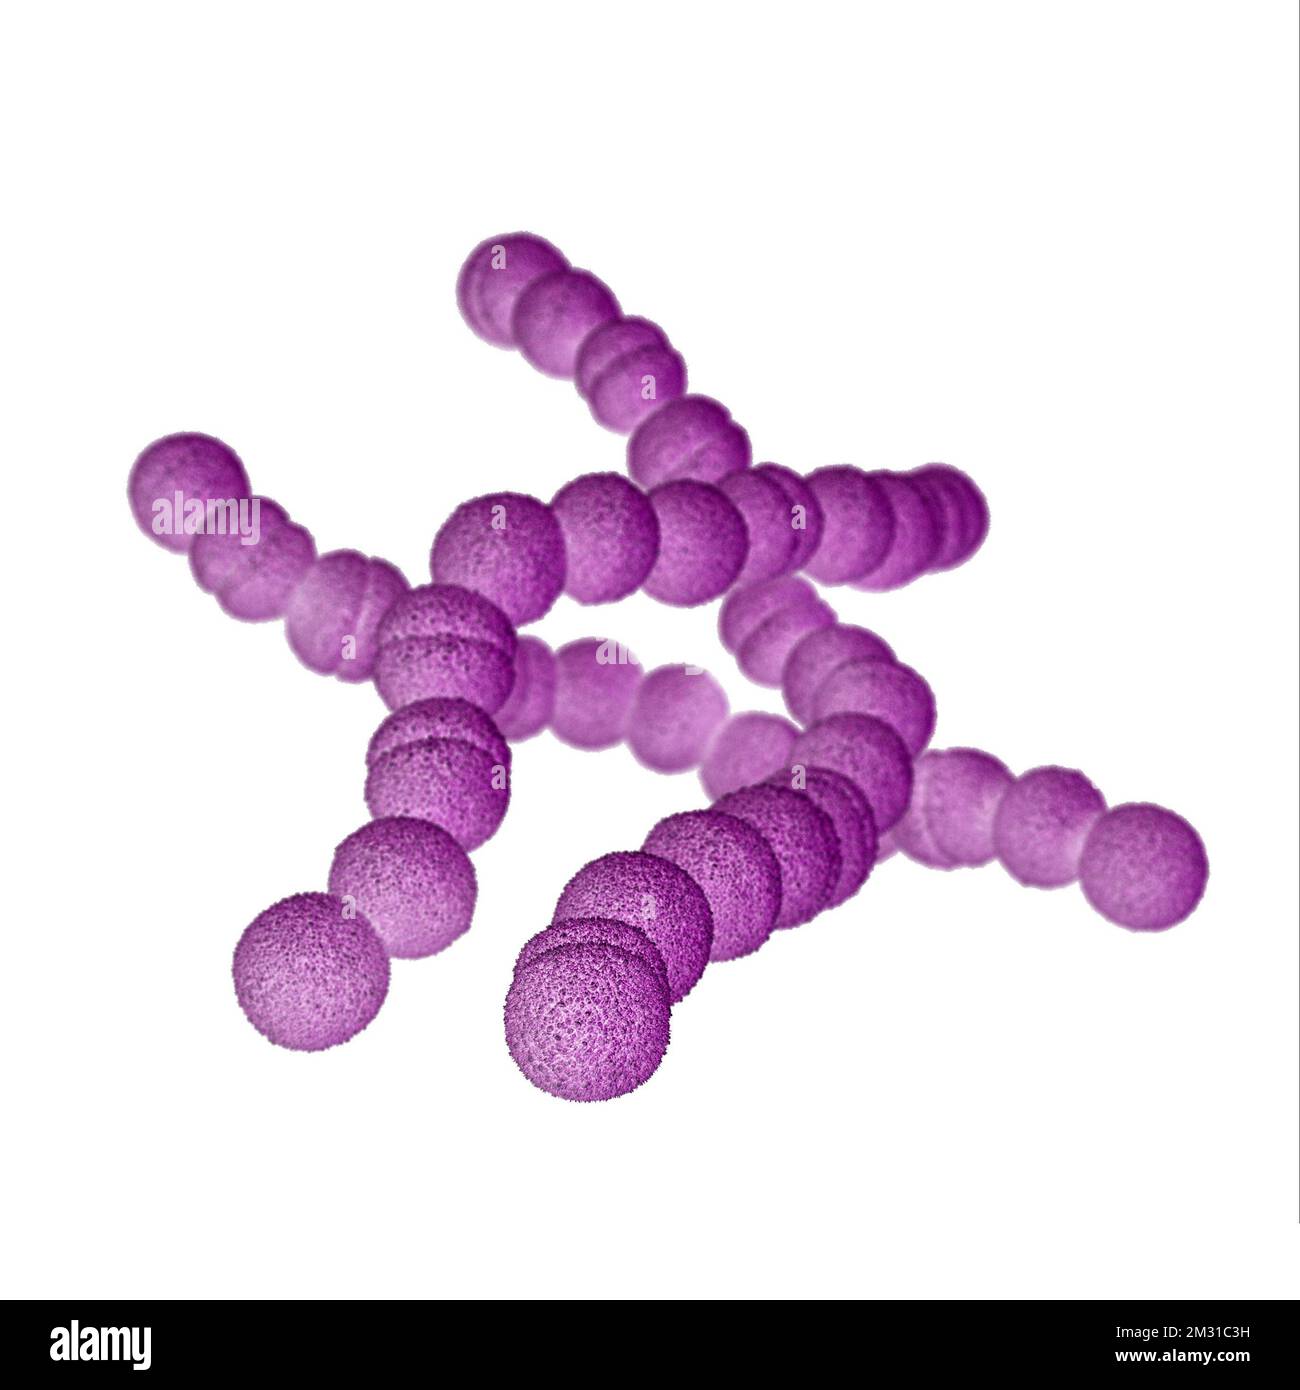 Group A streptococcus bacteria. STREP A Streptococcus pyogenes is a species of Gram-positive, aerotolerant bacteria in the genus Streptococcus. These bacteria are extracellular, and made up of non-motile and non-sporing cocci that tend to link in chains. This illustration depicted a 3D, computer-generated image, of a group of Gram-positive, Streptococcus pyogenes (group A Streptococcus) bacteria. The visualisation was based upon scanning electron microscopic (SEM) imagery.   Optimised version of an image produced by the US Centers for Disease Control and Prevention / credit CDC /J.Oosthuizen Stock Photo